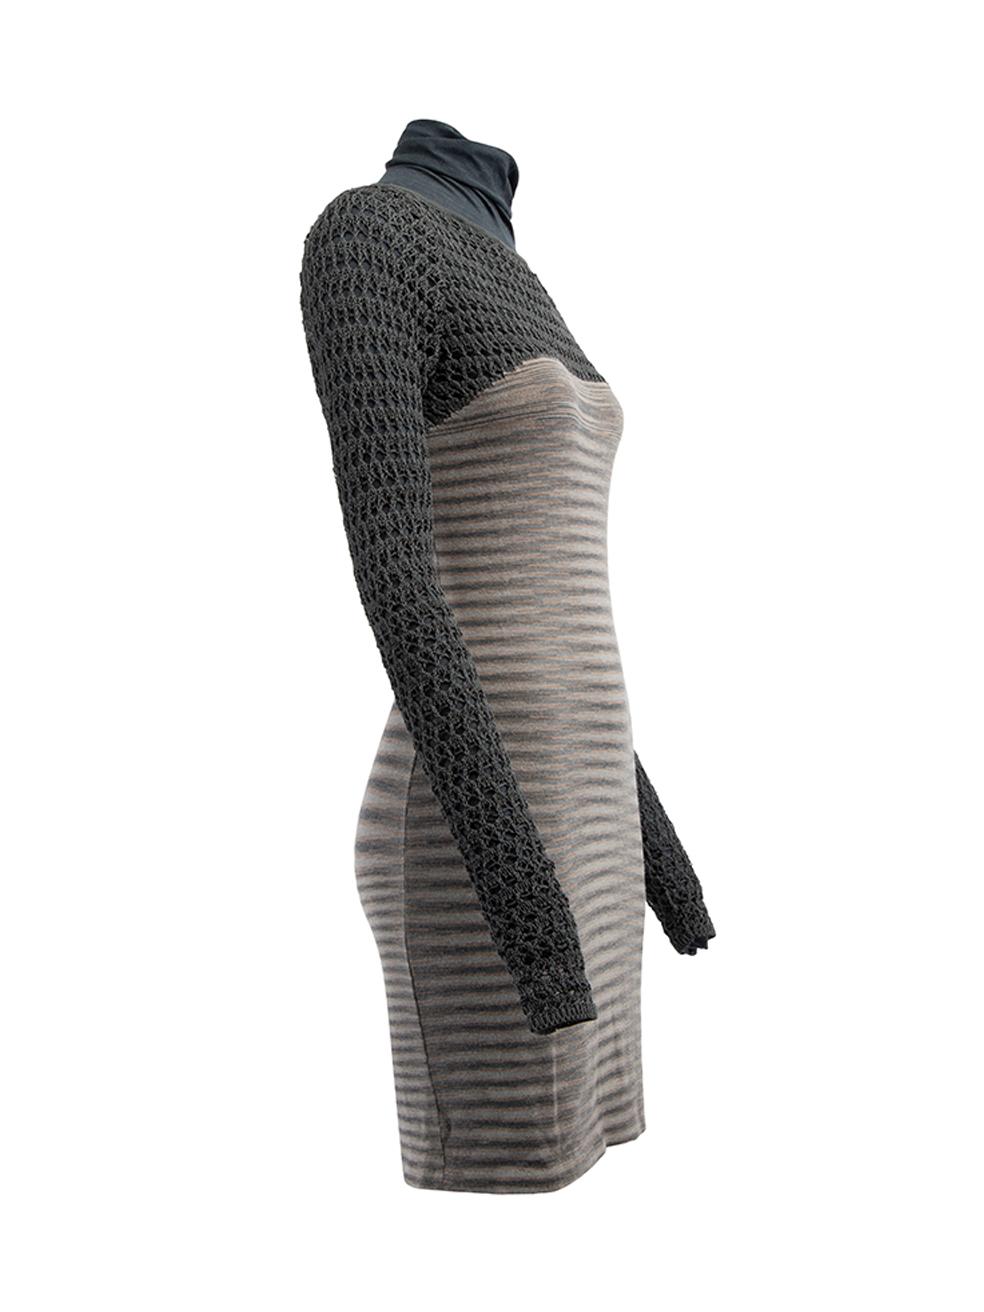 CONDITION is Very good. Hardly any visible wear to dress is evident on this used Missoni designer resale item. Details Grey Wool Mini bilayer dress Turtleneck underlayer dress Crochet and striped panel dress Made in Italy Composition 80% Wool, 12%